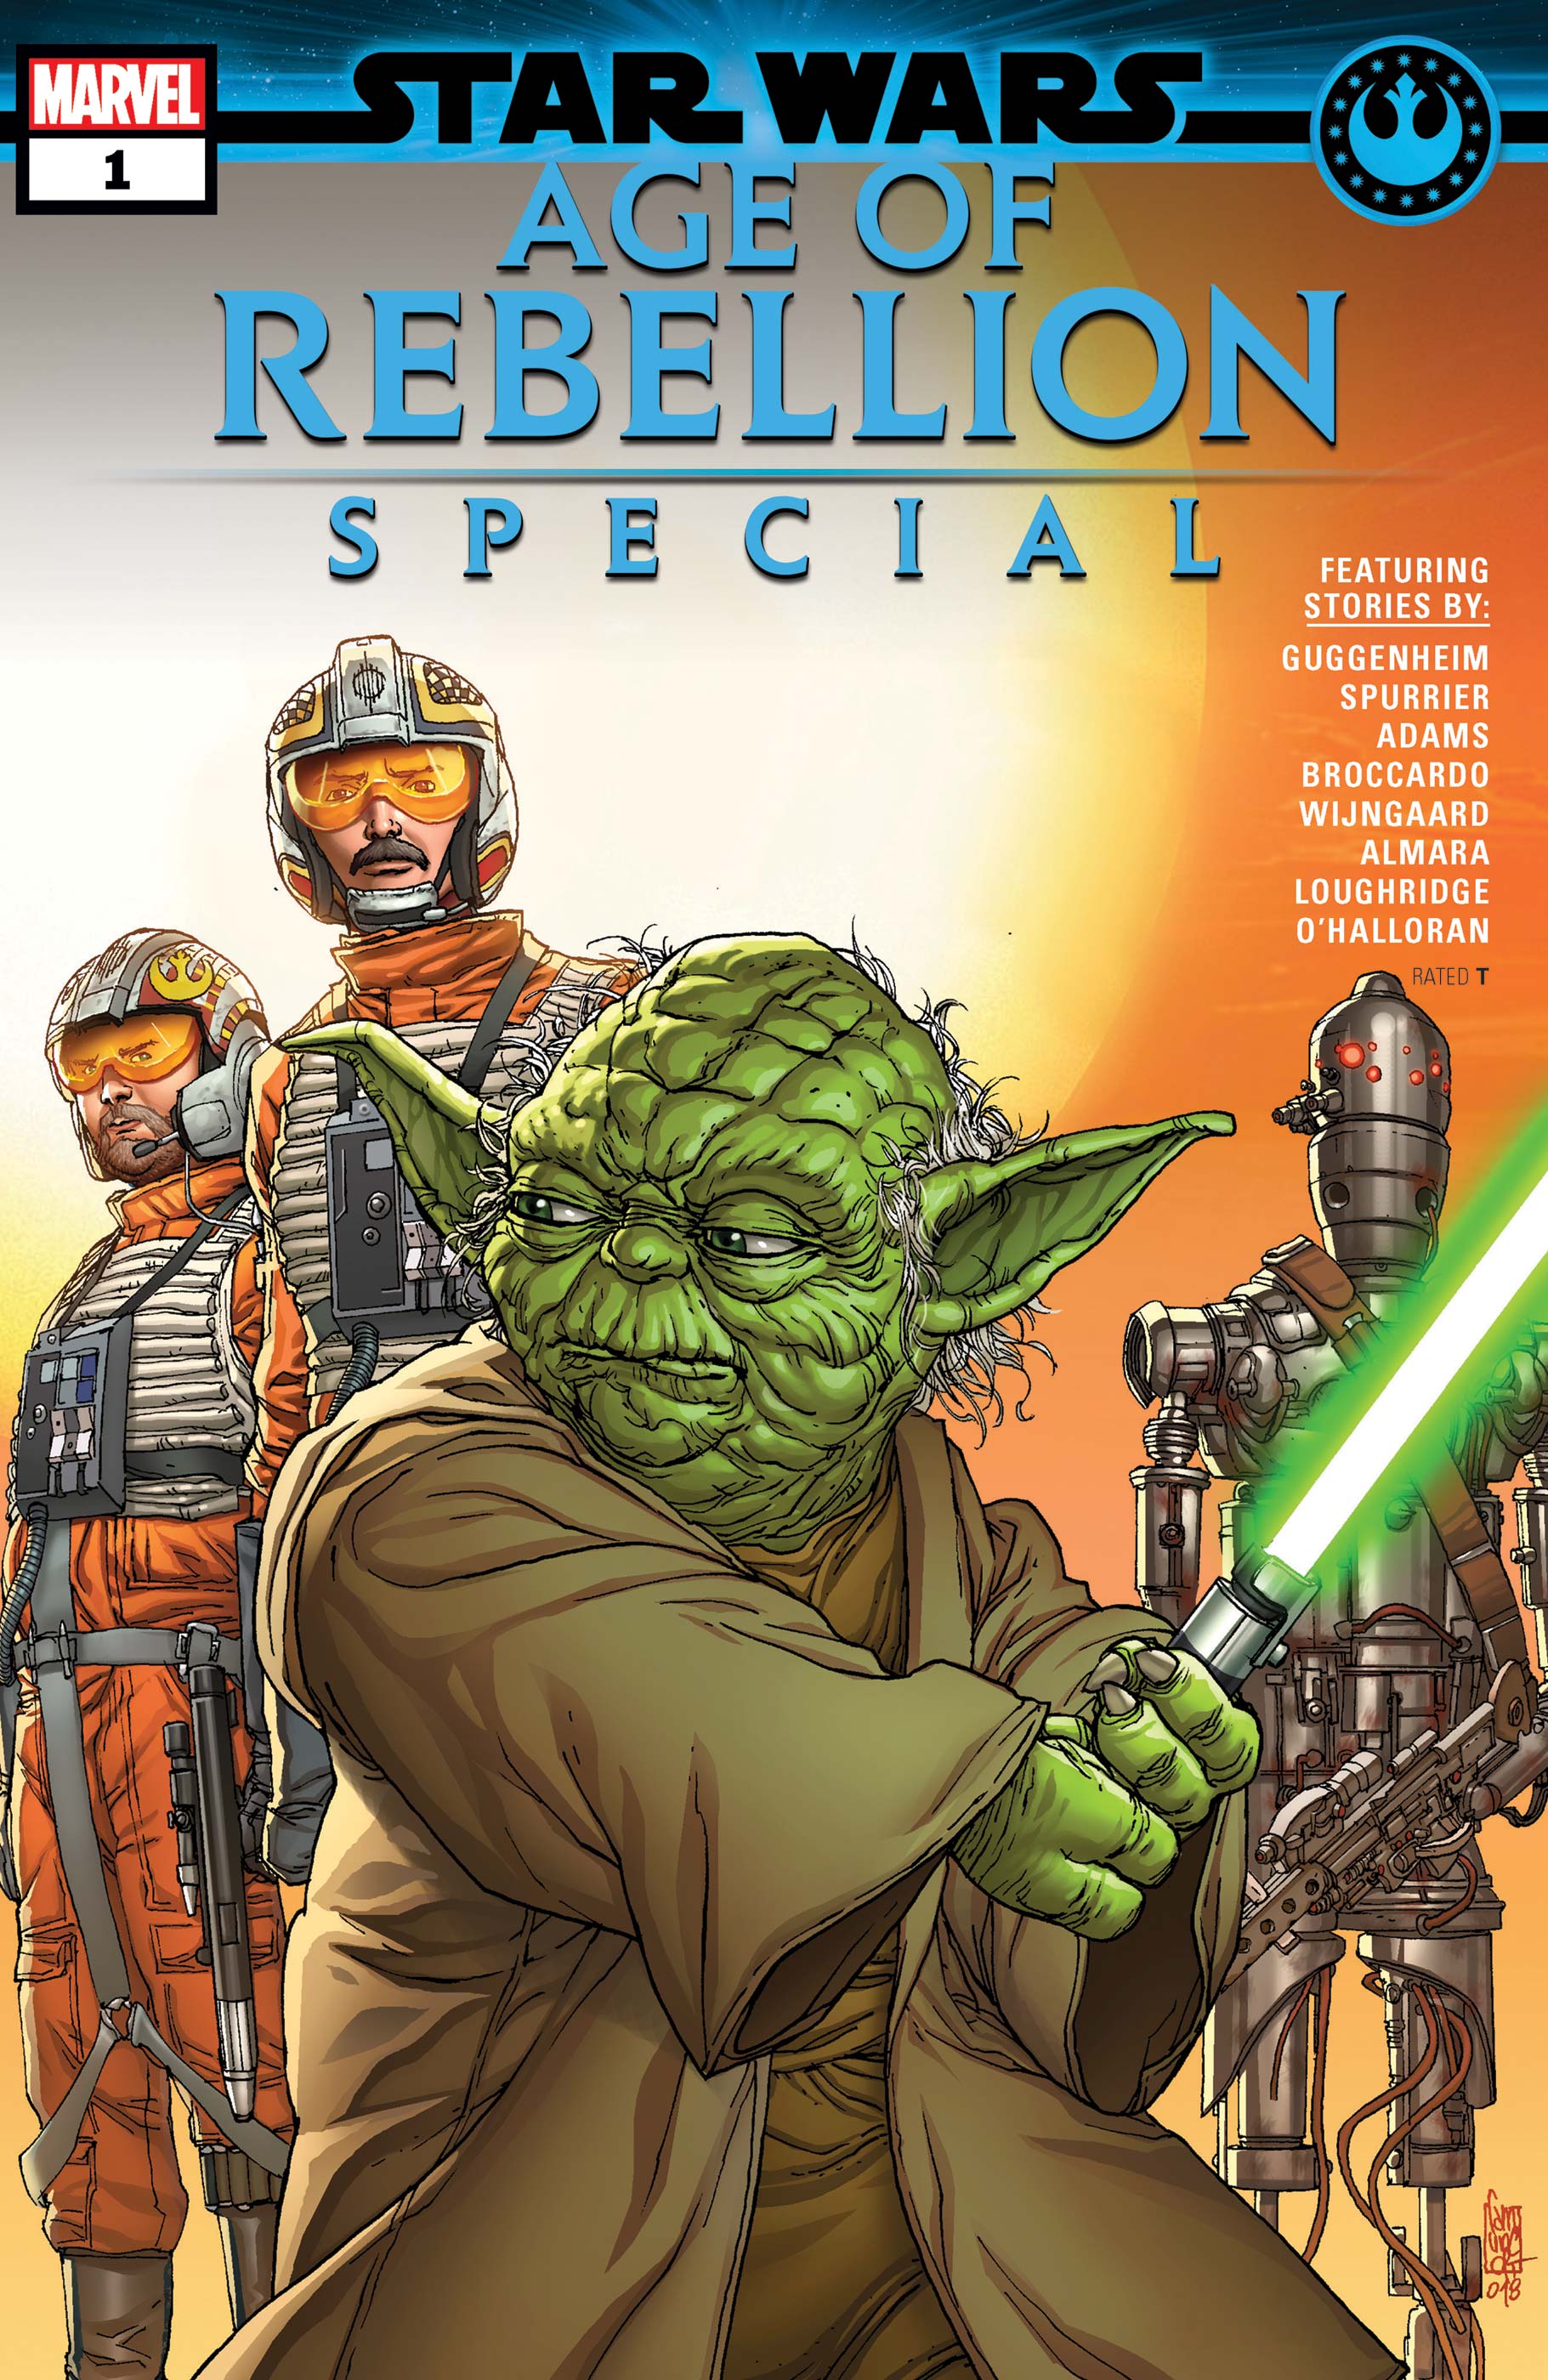 Star Wars: Age of Rebellion Special (2019) #1